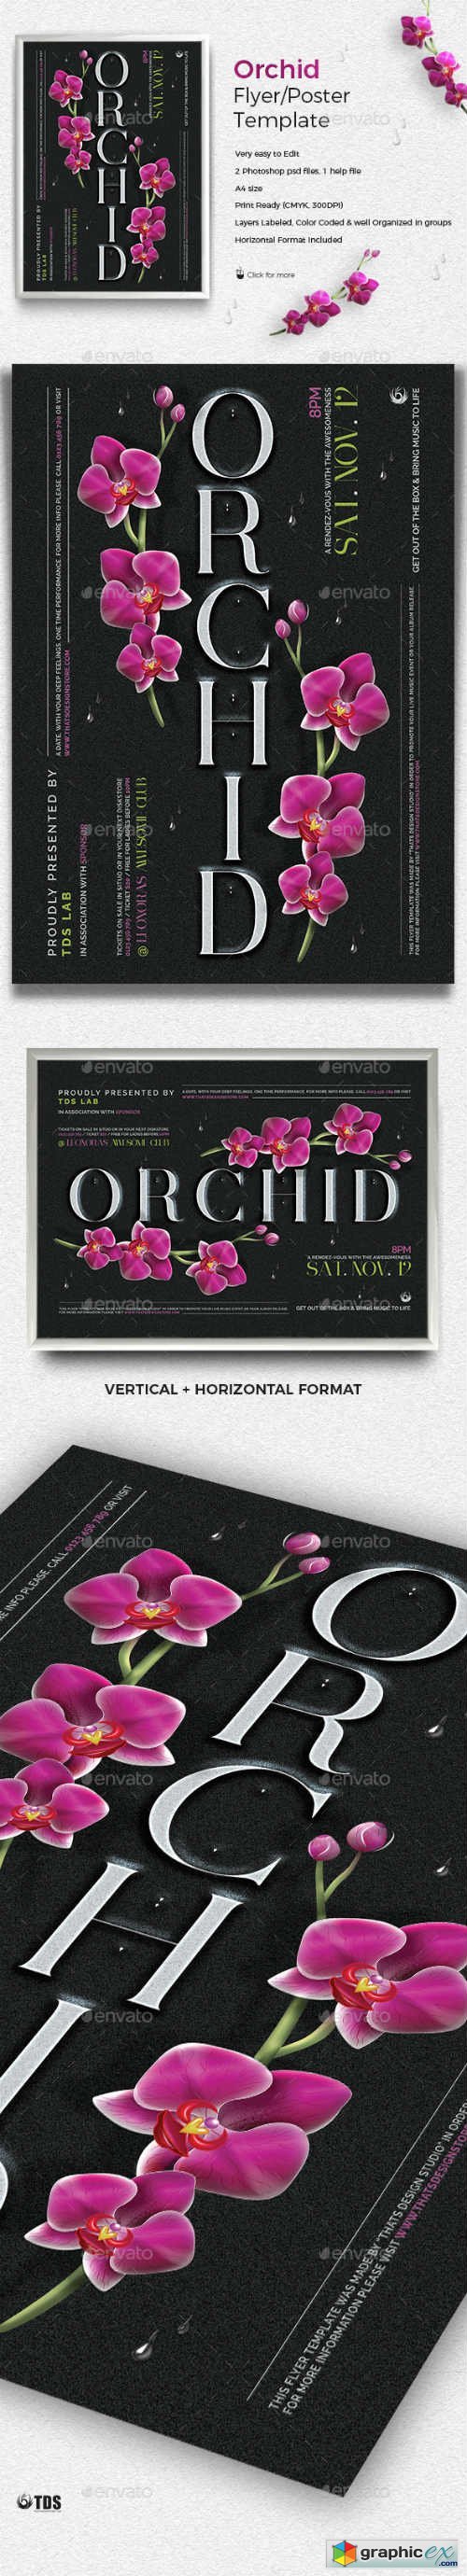 Orchid Flyer Template